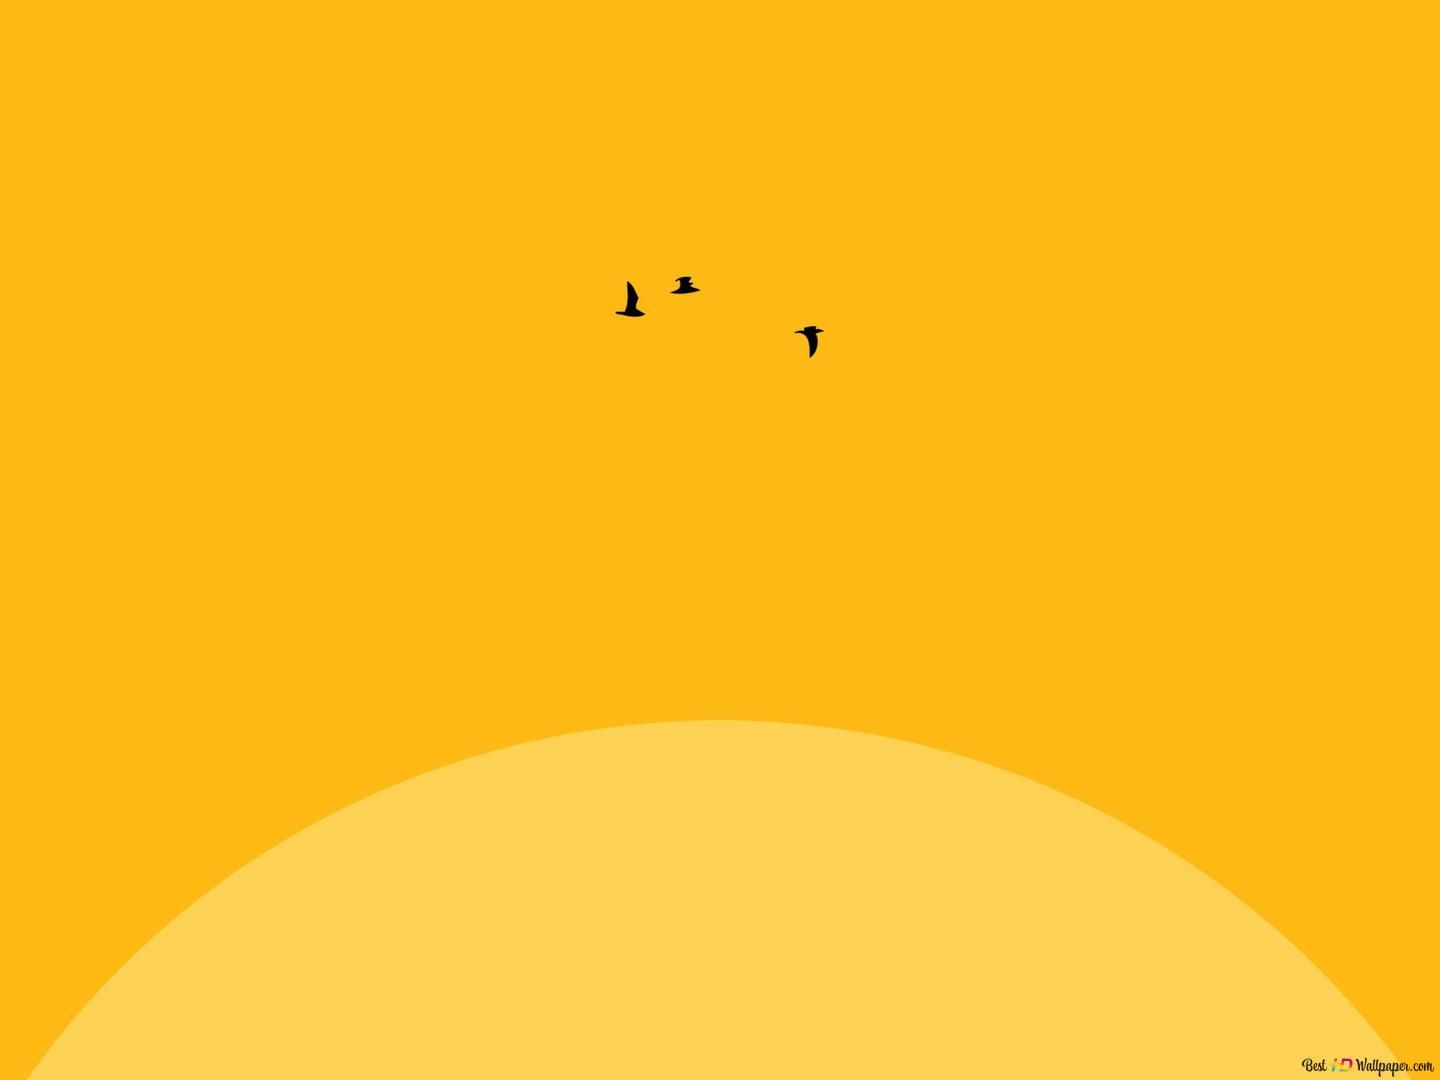 Minimalistic wallpaper of a sun and birds flying in the sky - Light yellow